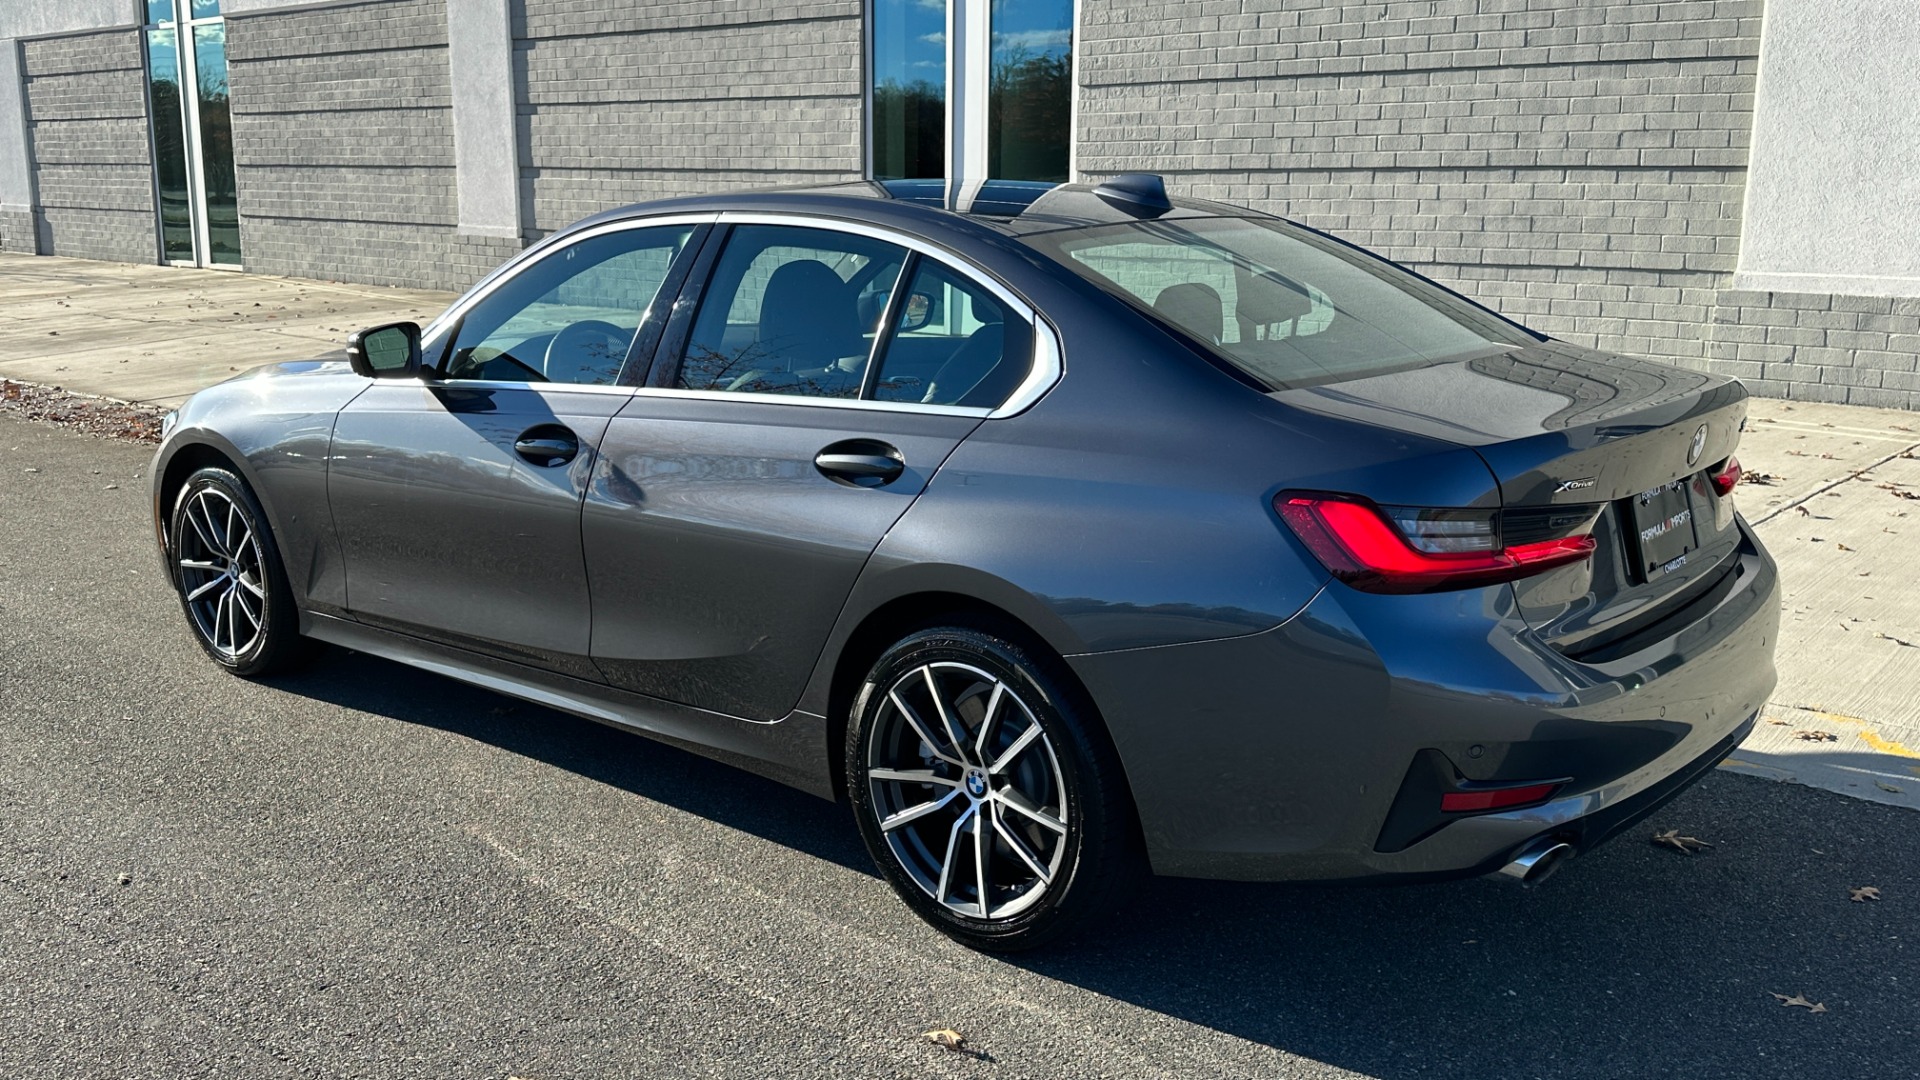 Used 2020 BMW 3 Series 330i xDRIVE / CONVENIENCE / HEATED SEATS / AMBIENT LIGHTING / REMOTE START for sale $36,995 at Formula Imports in Charlotte NC 28227 7